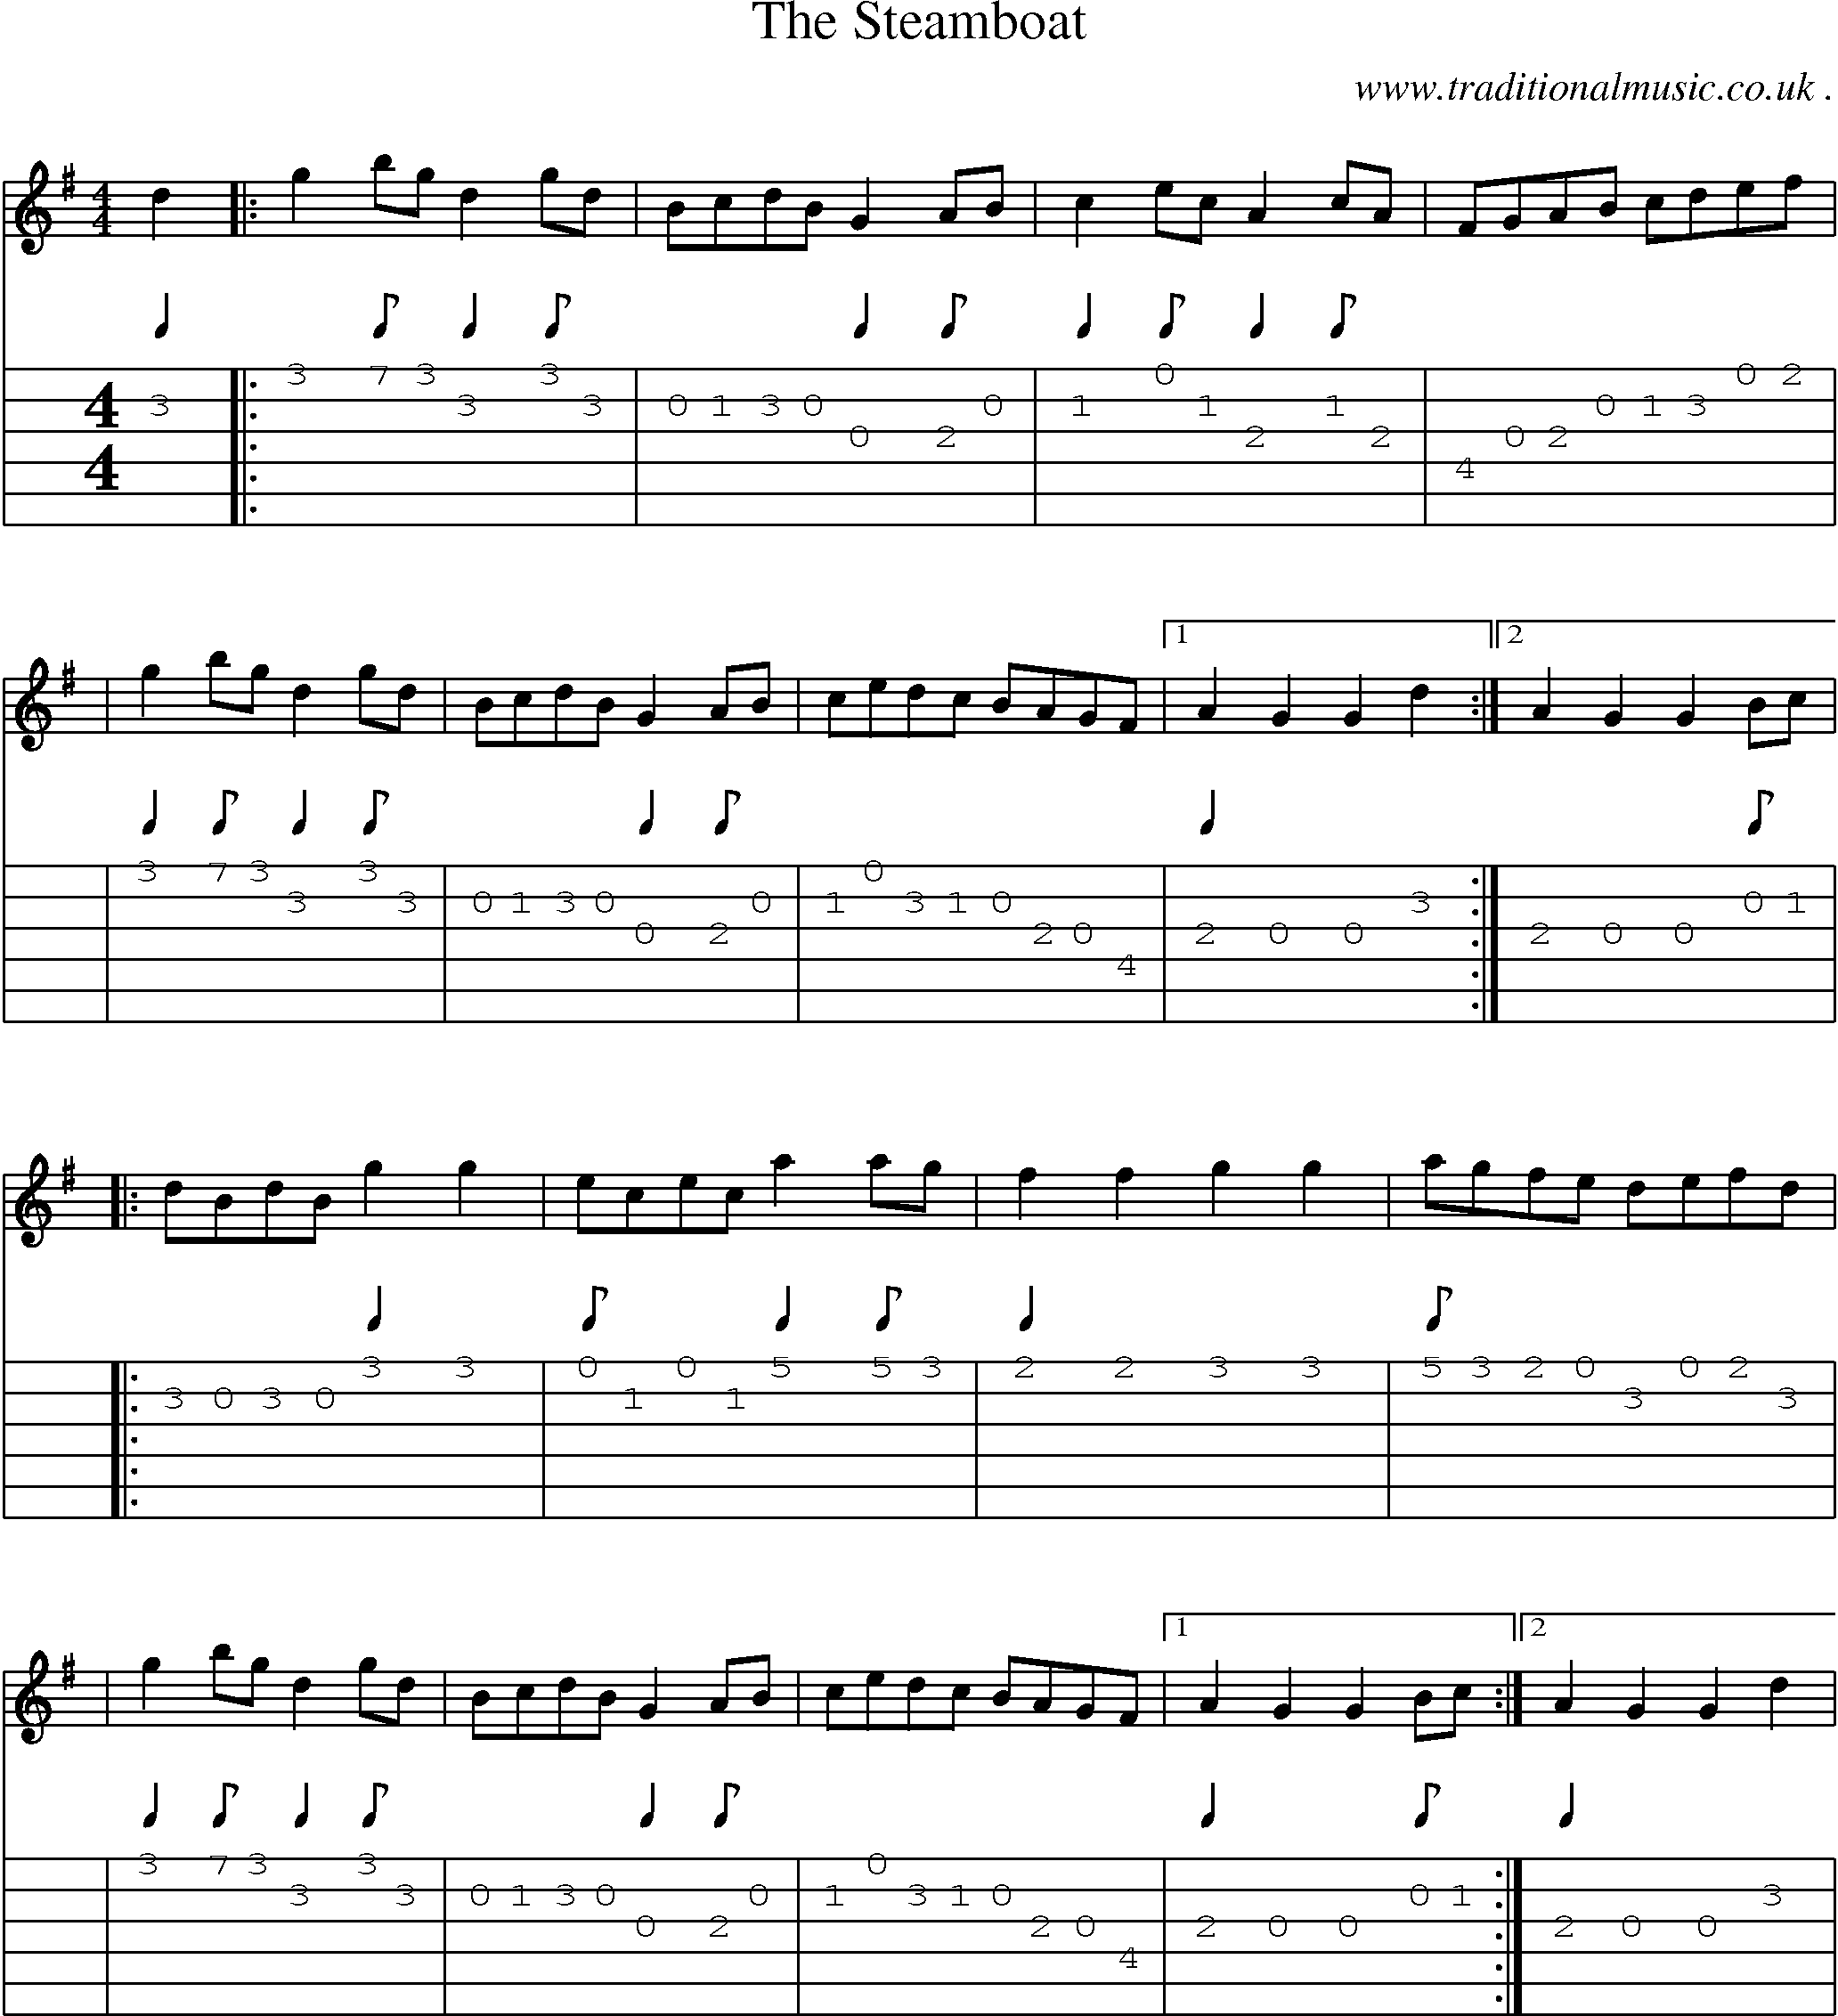 Sheet-Music and Guitar Tabs for The Steamboat